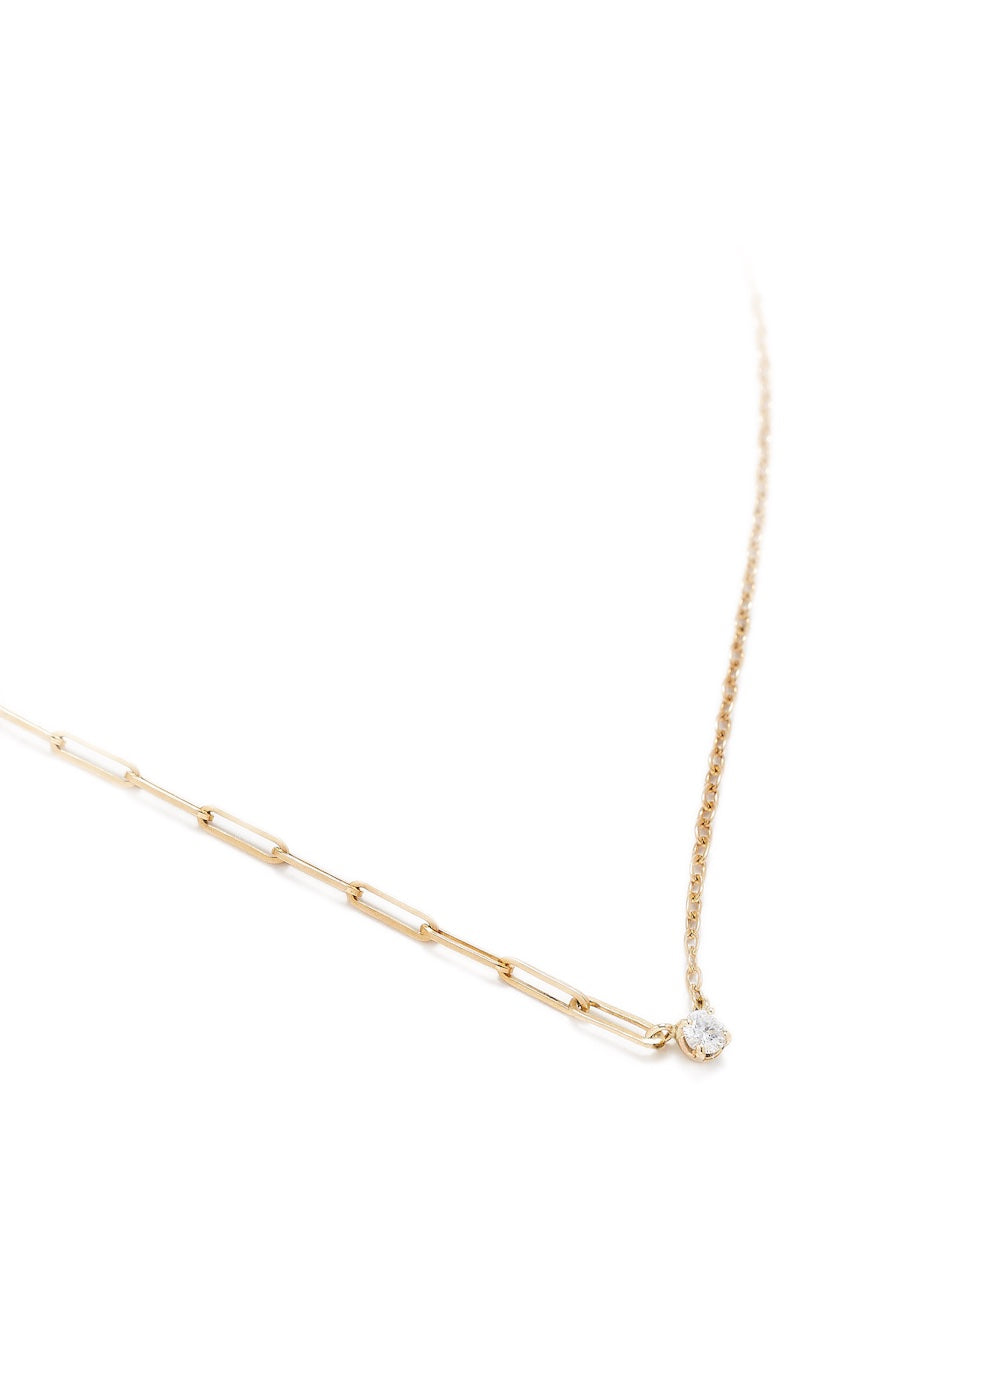 Solitaire Rond 18k yellow gold diamond necklace